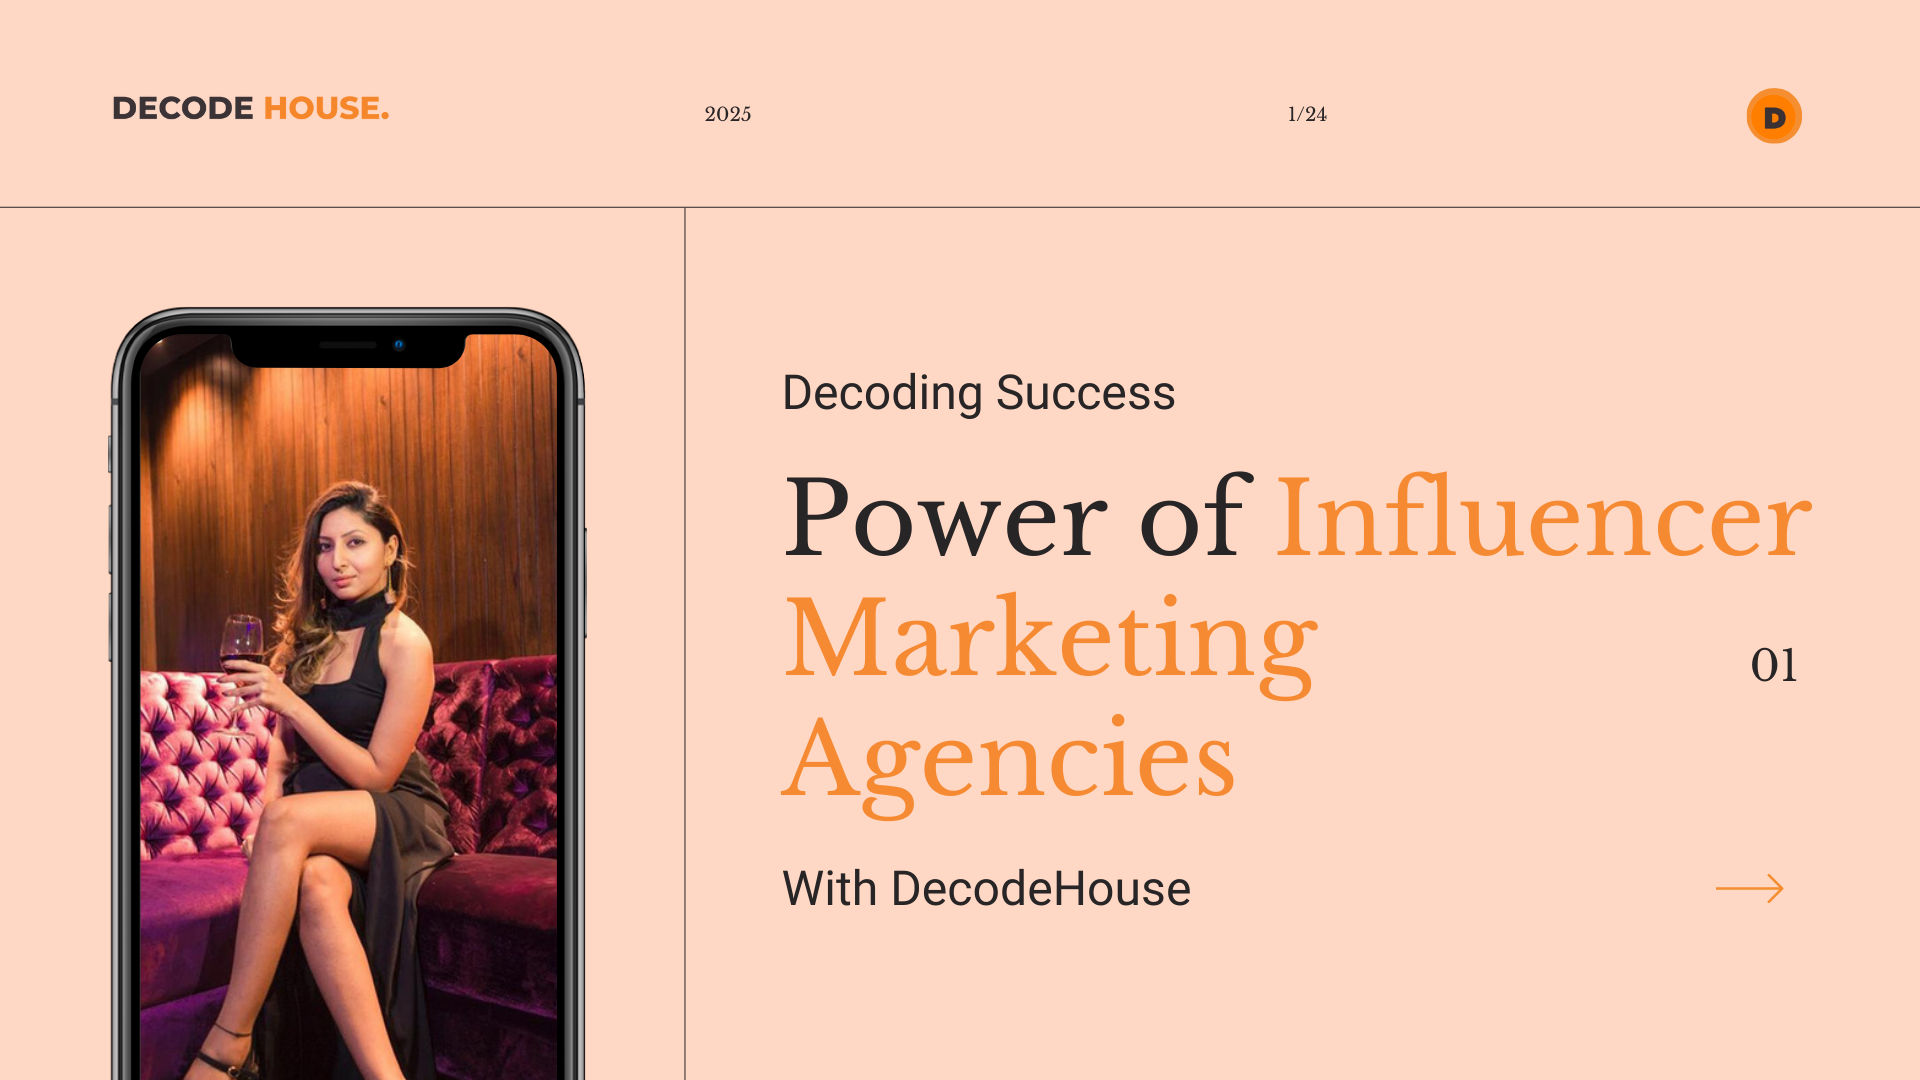 Decoding Success: The Power of Influencer Marketing Agencies with DecodeHouse